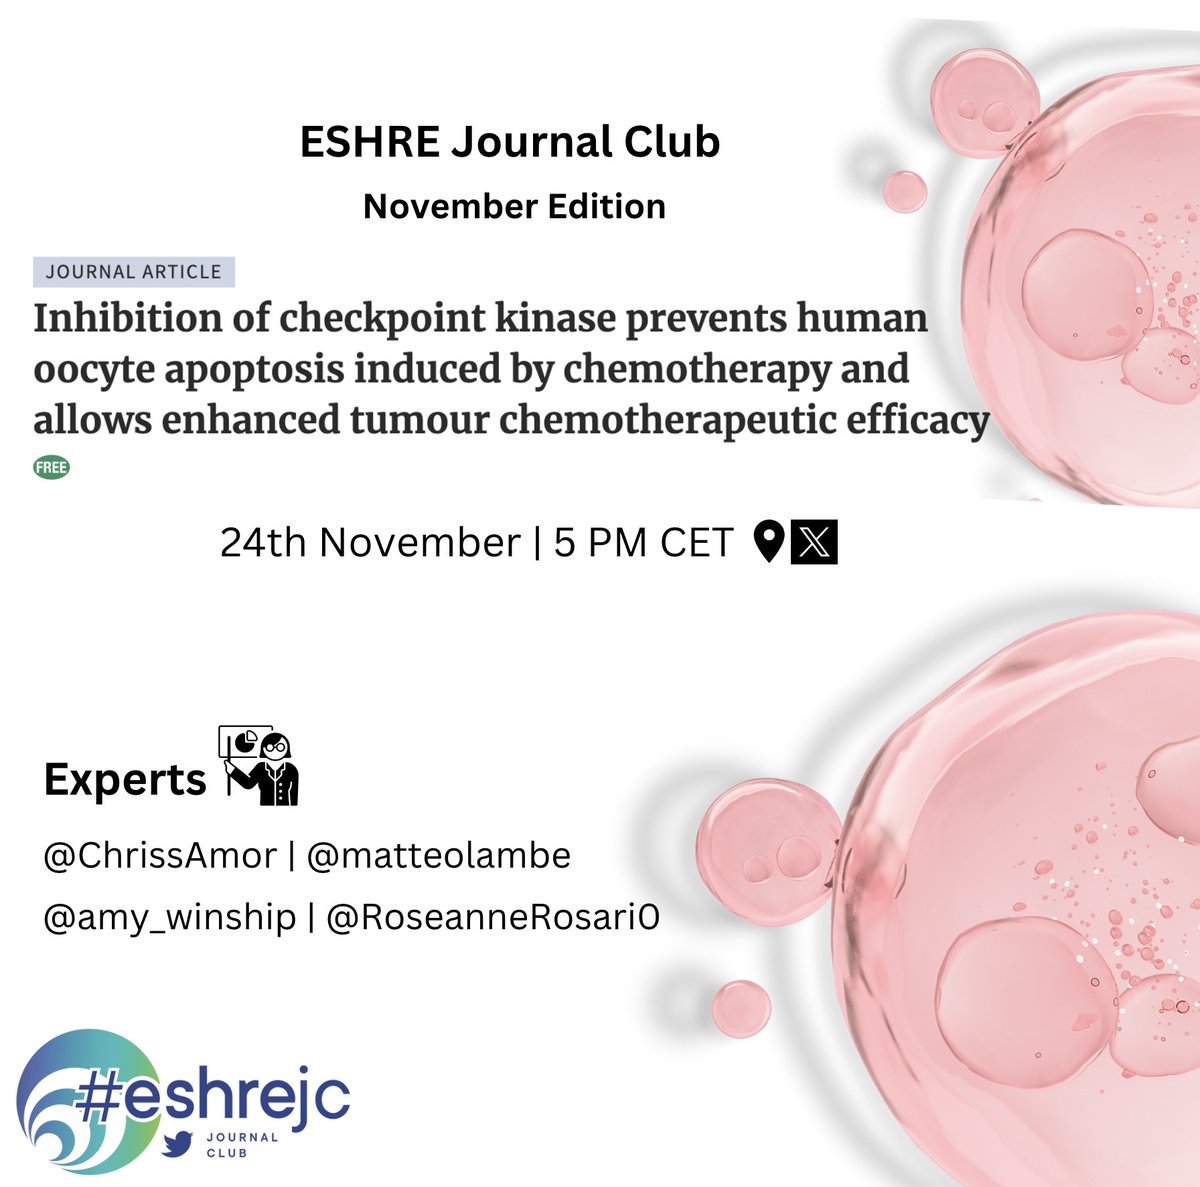 Nov #ESHREjc is approaching! Seatbelts fastened? 🚗 ‼️Do checkpoint kinase inhibitors have chemo-protective effects on human oocytes? ‼️ How this will affect #FertilityPreservation? 🔗 Free access: academic.oup.com/humrep/article… See you then @ESHRE